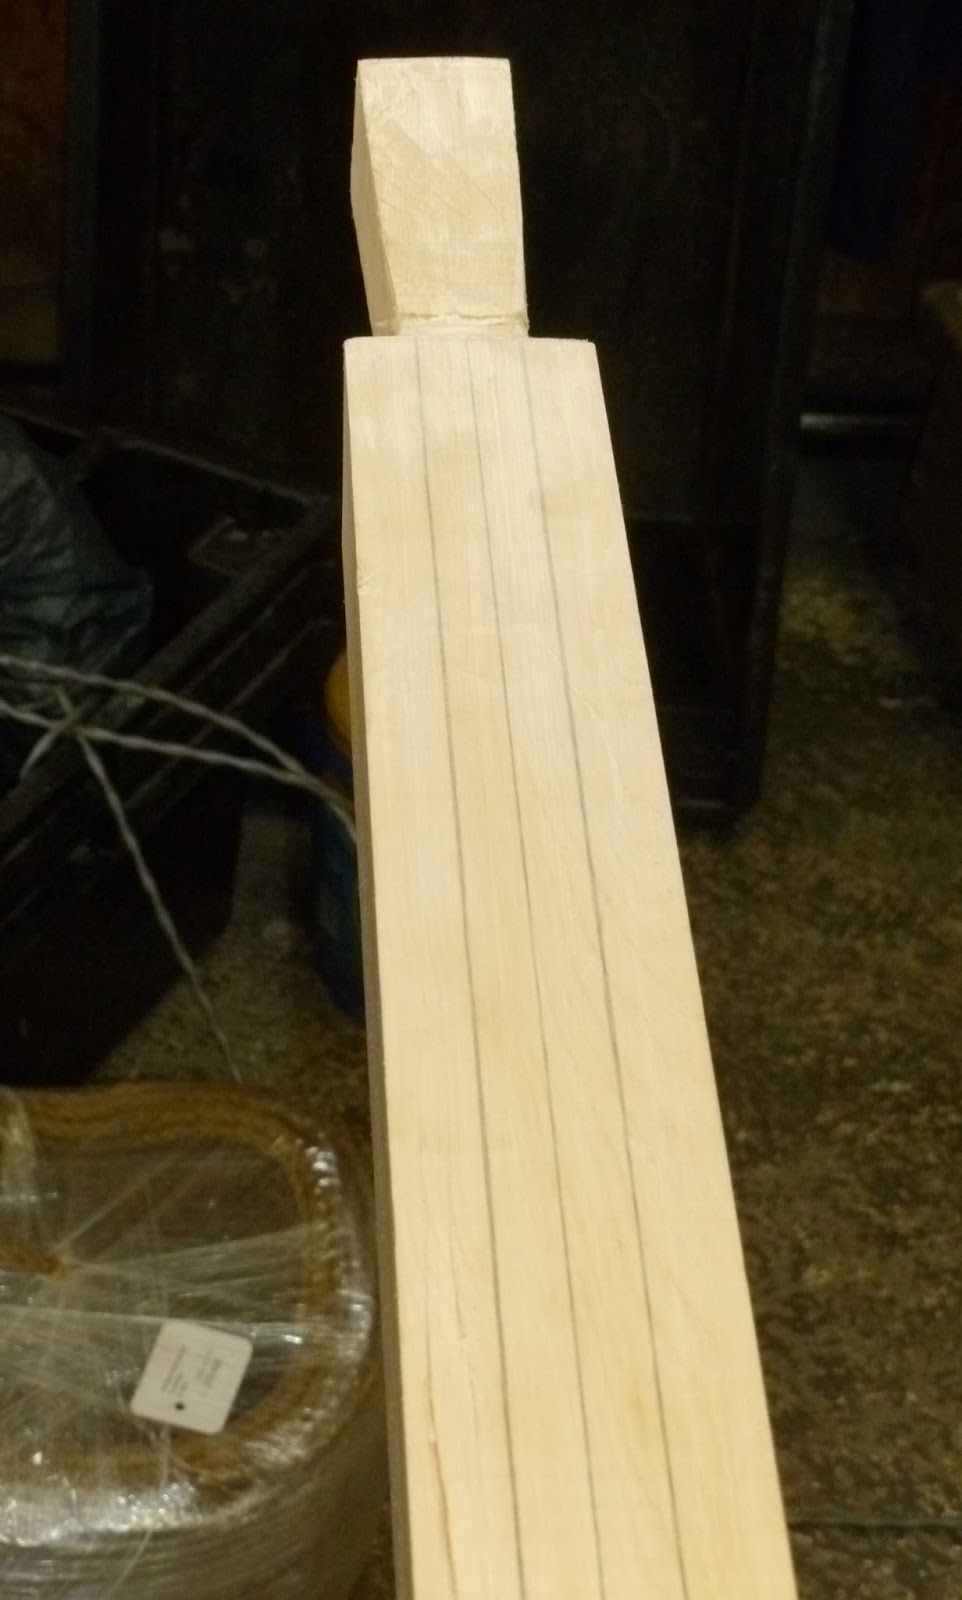 ... making the oar round. This wood for this oar is yellow cedar